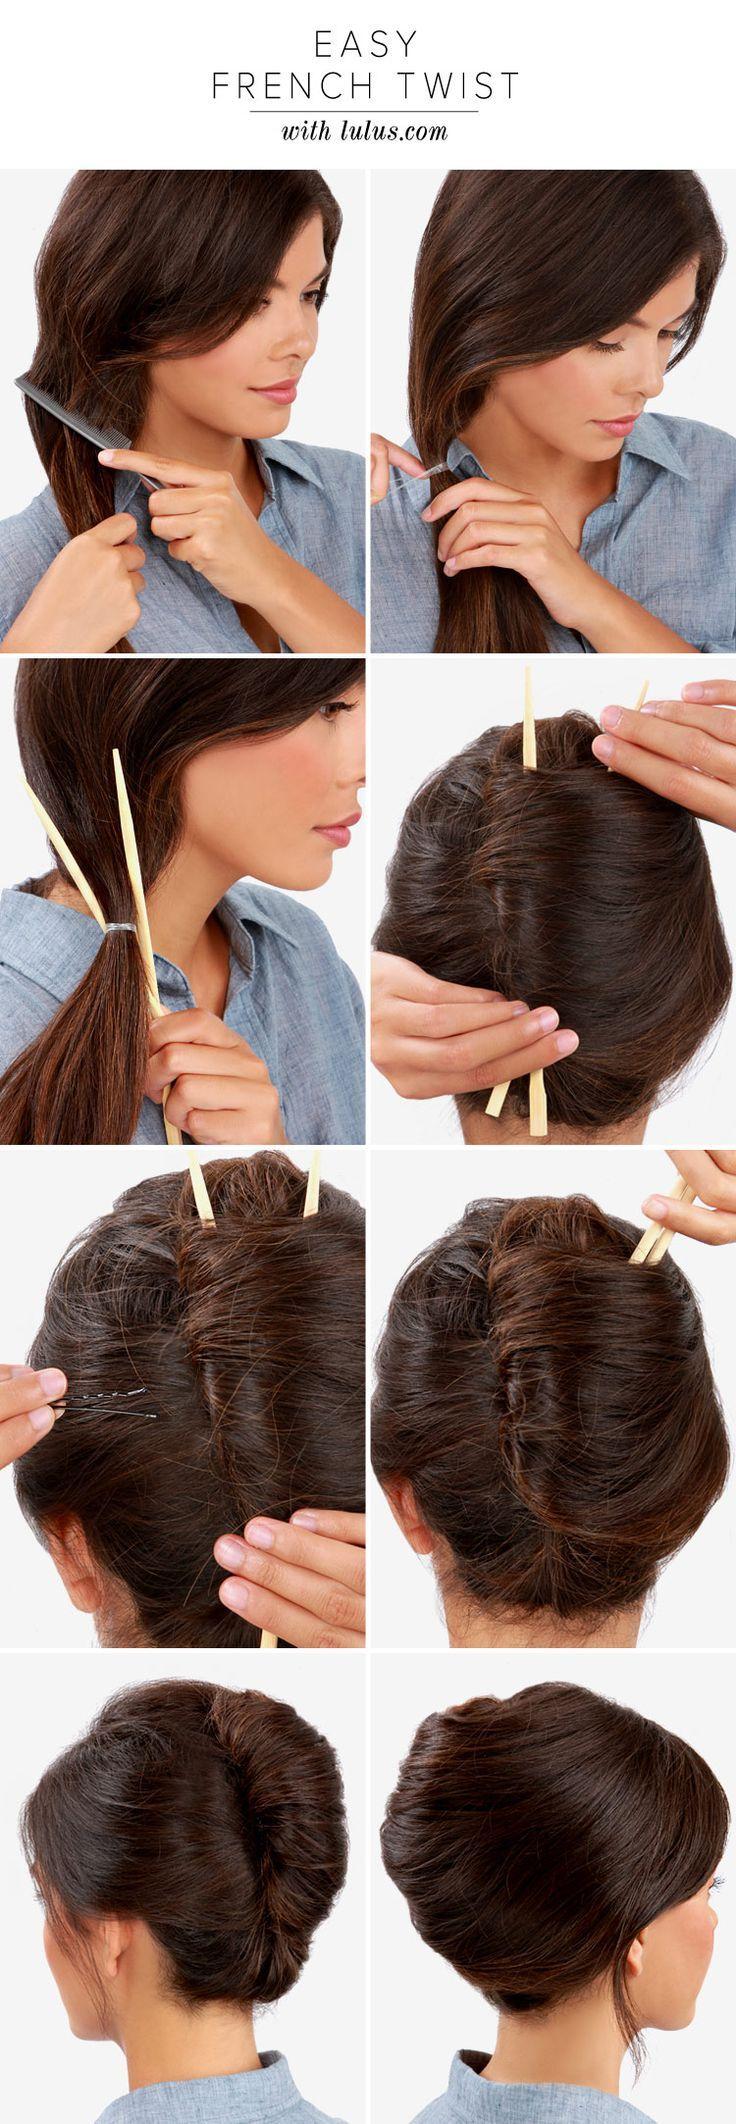 Wedding - If You've Ever Wondered How To Achieve The Perfect French Twist We Have Just The Guide For You! Check Out How To Use Chopsticks To Create This Chic Look!